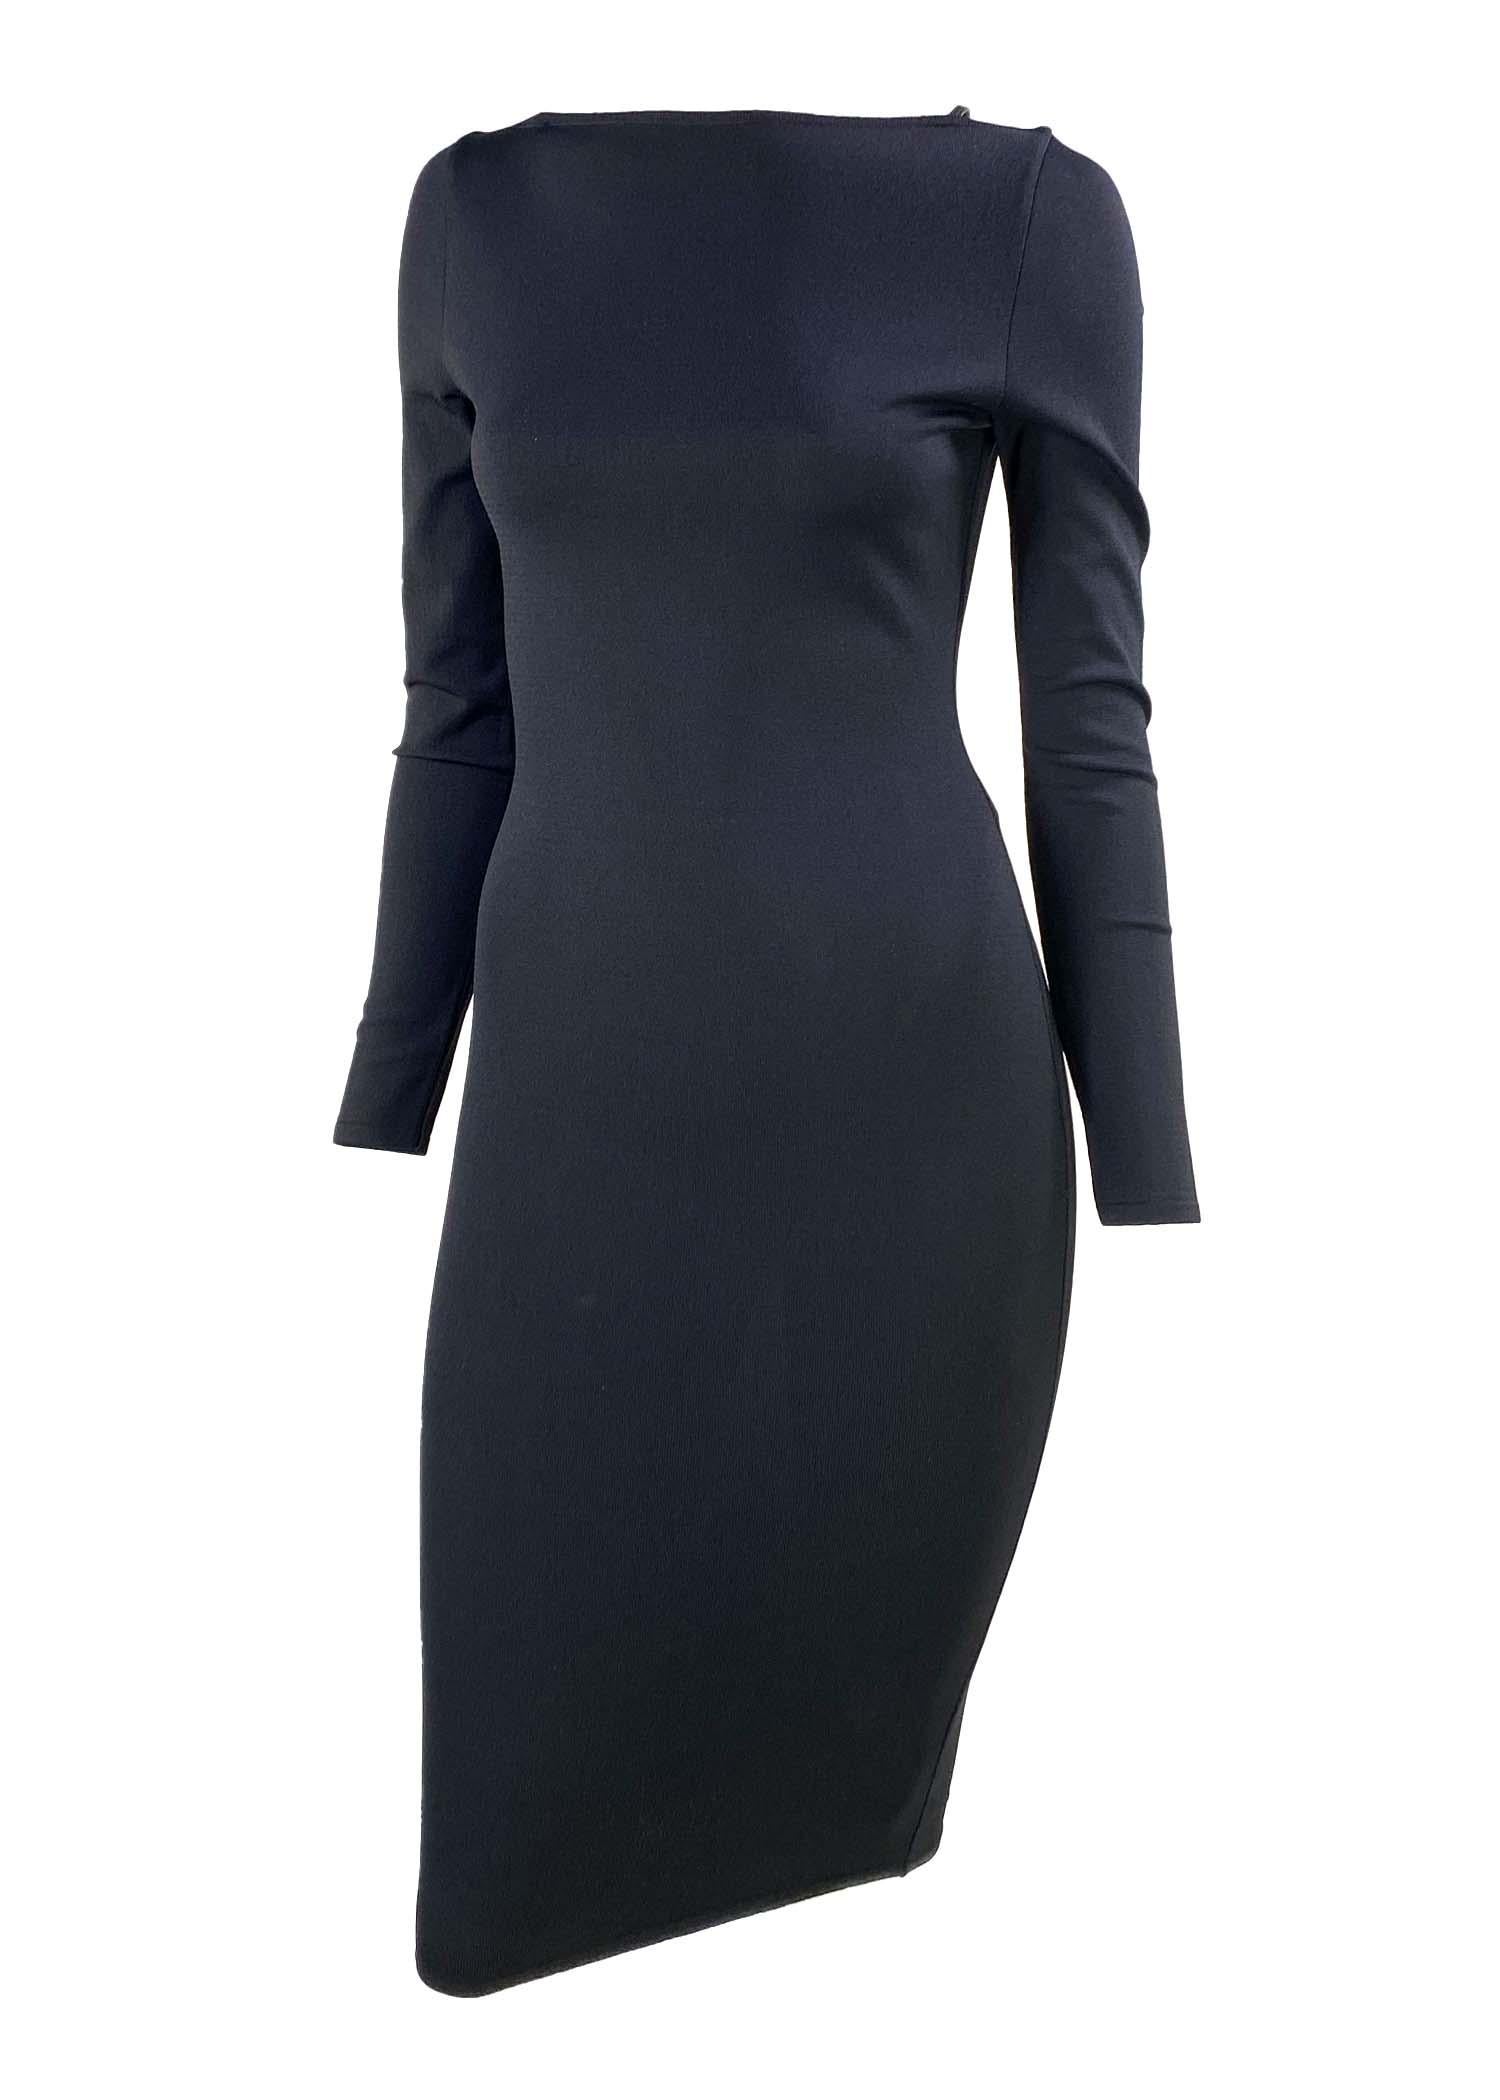 S/S 1998 Gucci by Tom Ford Leather Strap Black Knit Runway Dress In Excellent Condition For Sale In West Hollywood, CA